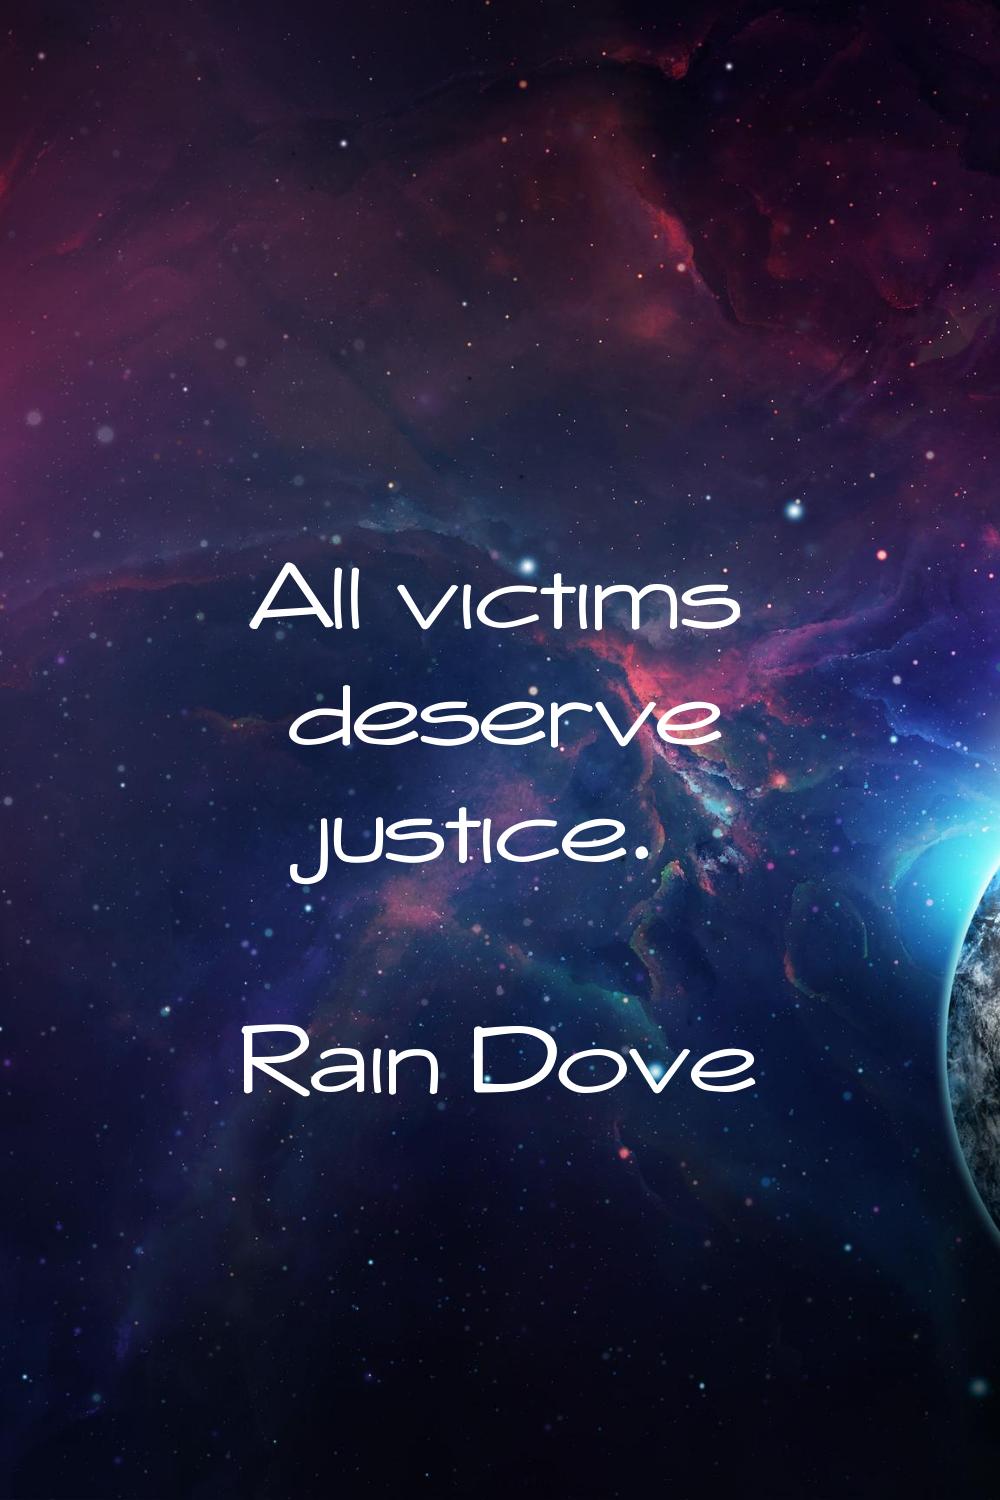 All victims deserve justice.